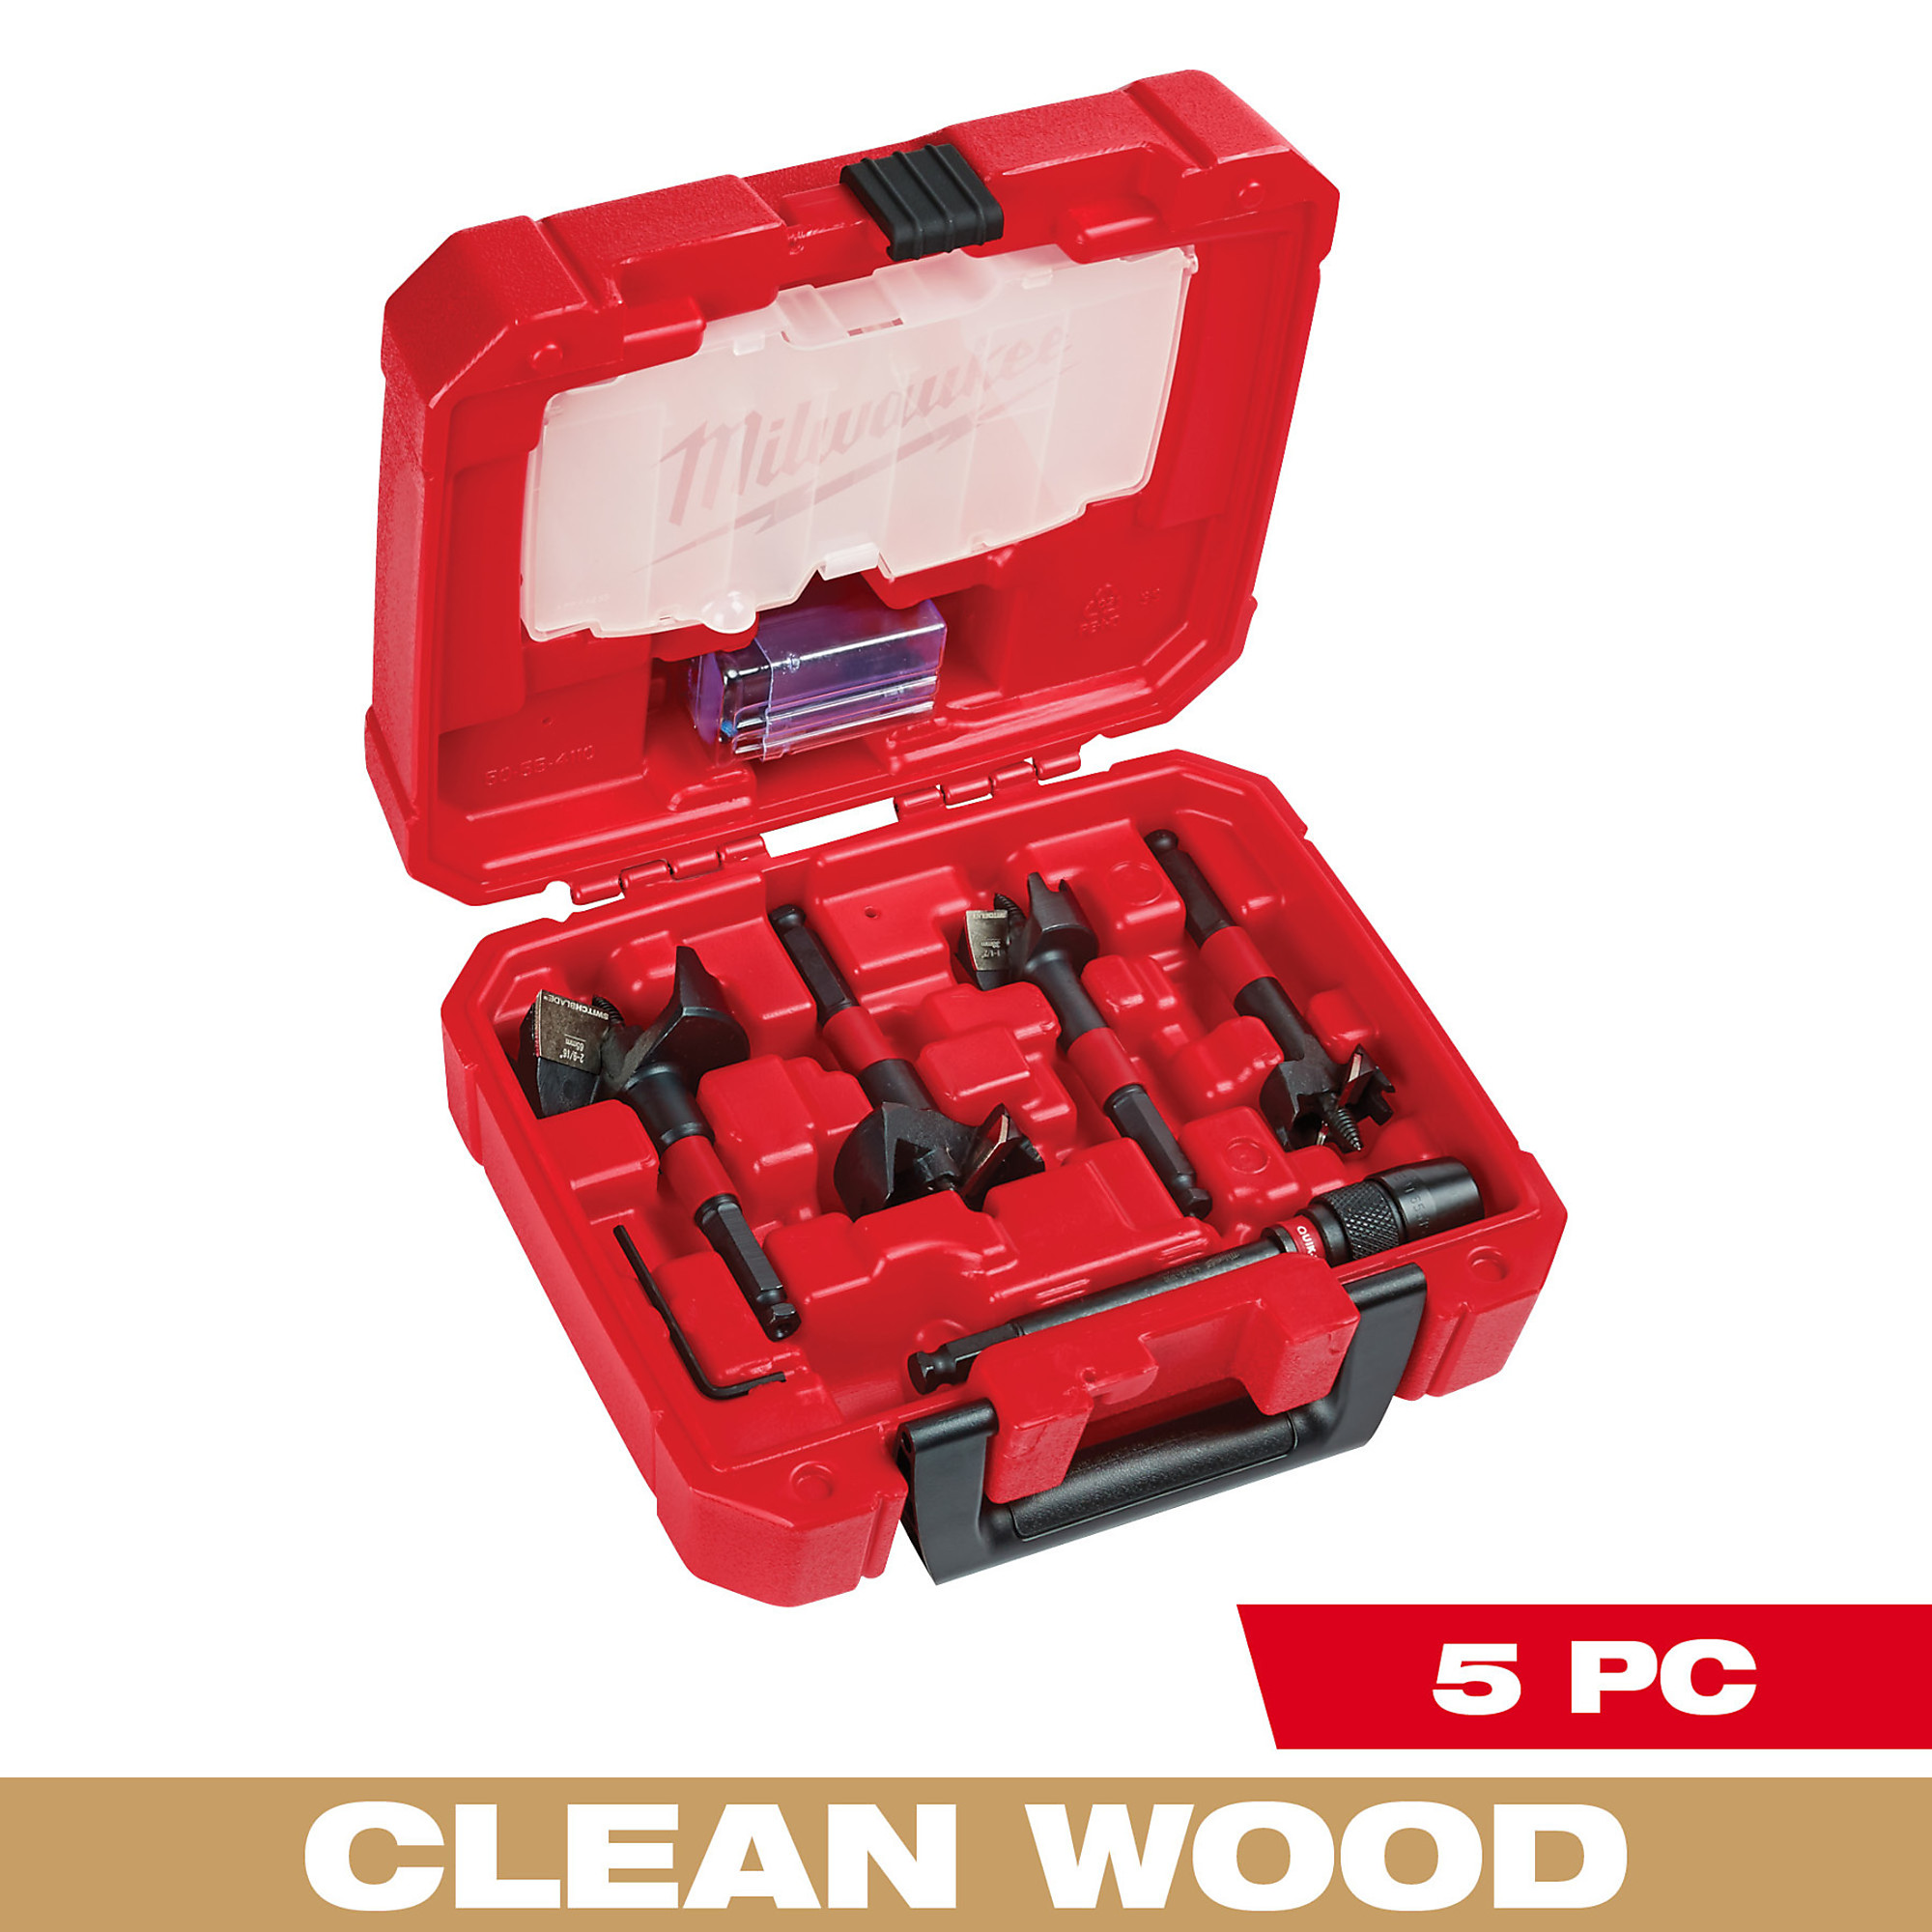 Milwaukee SwitchBlade , 5PC SwitchBlade Selfeed Bit Plumber's Kit, Included (qty.) 5 Model 49-22-5100